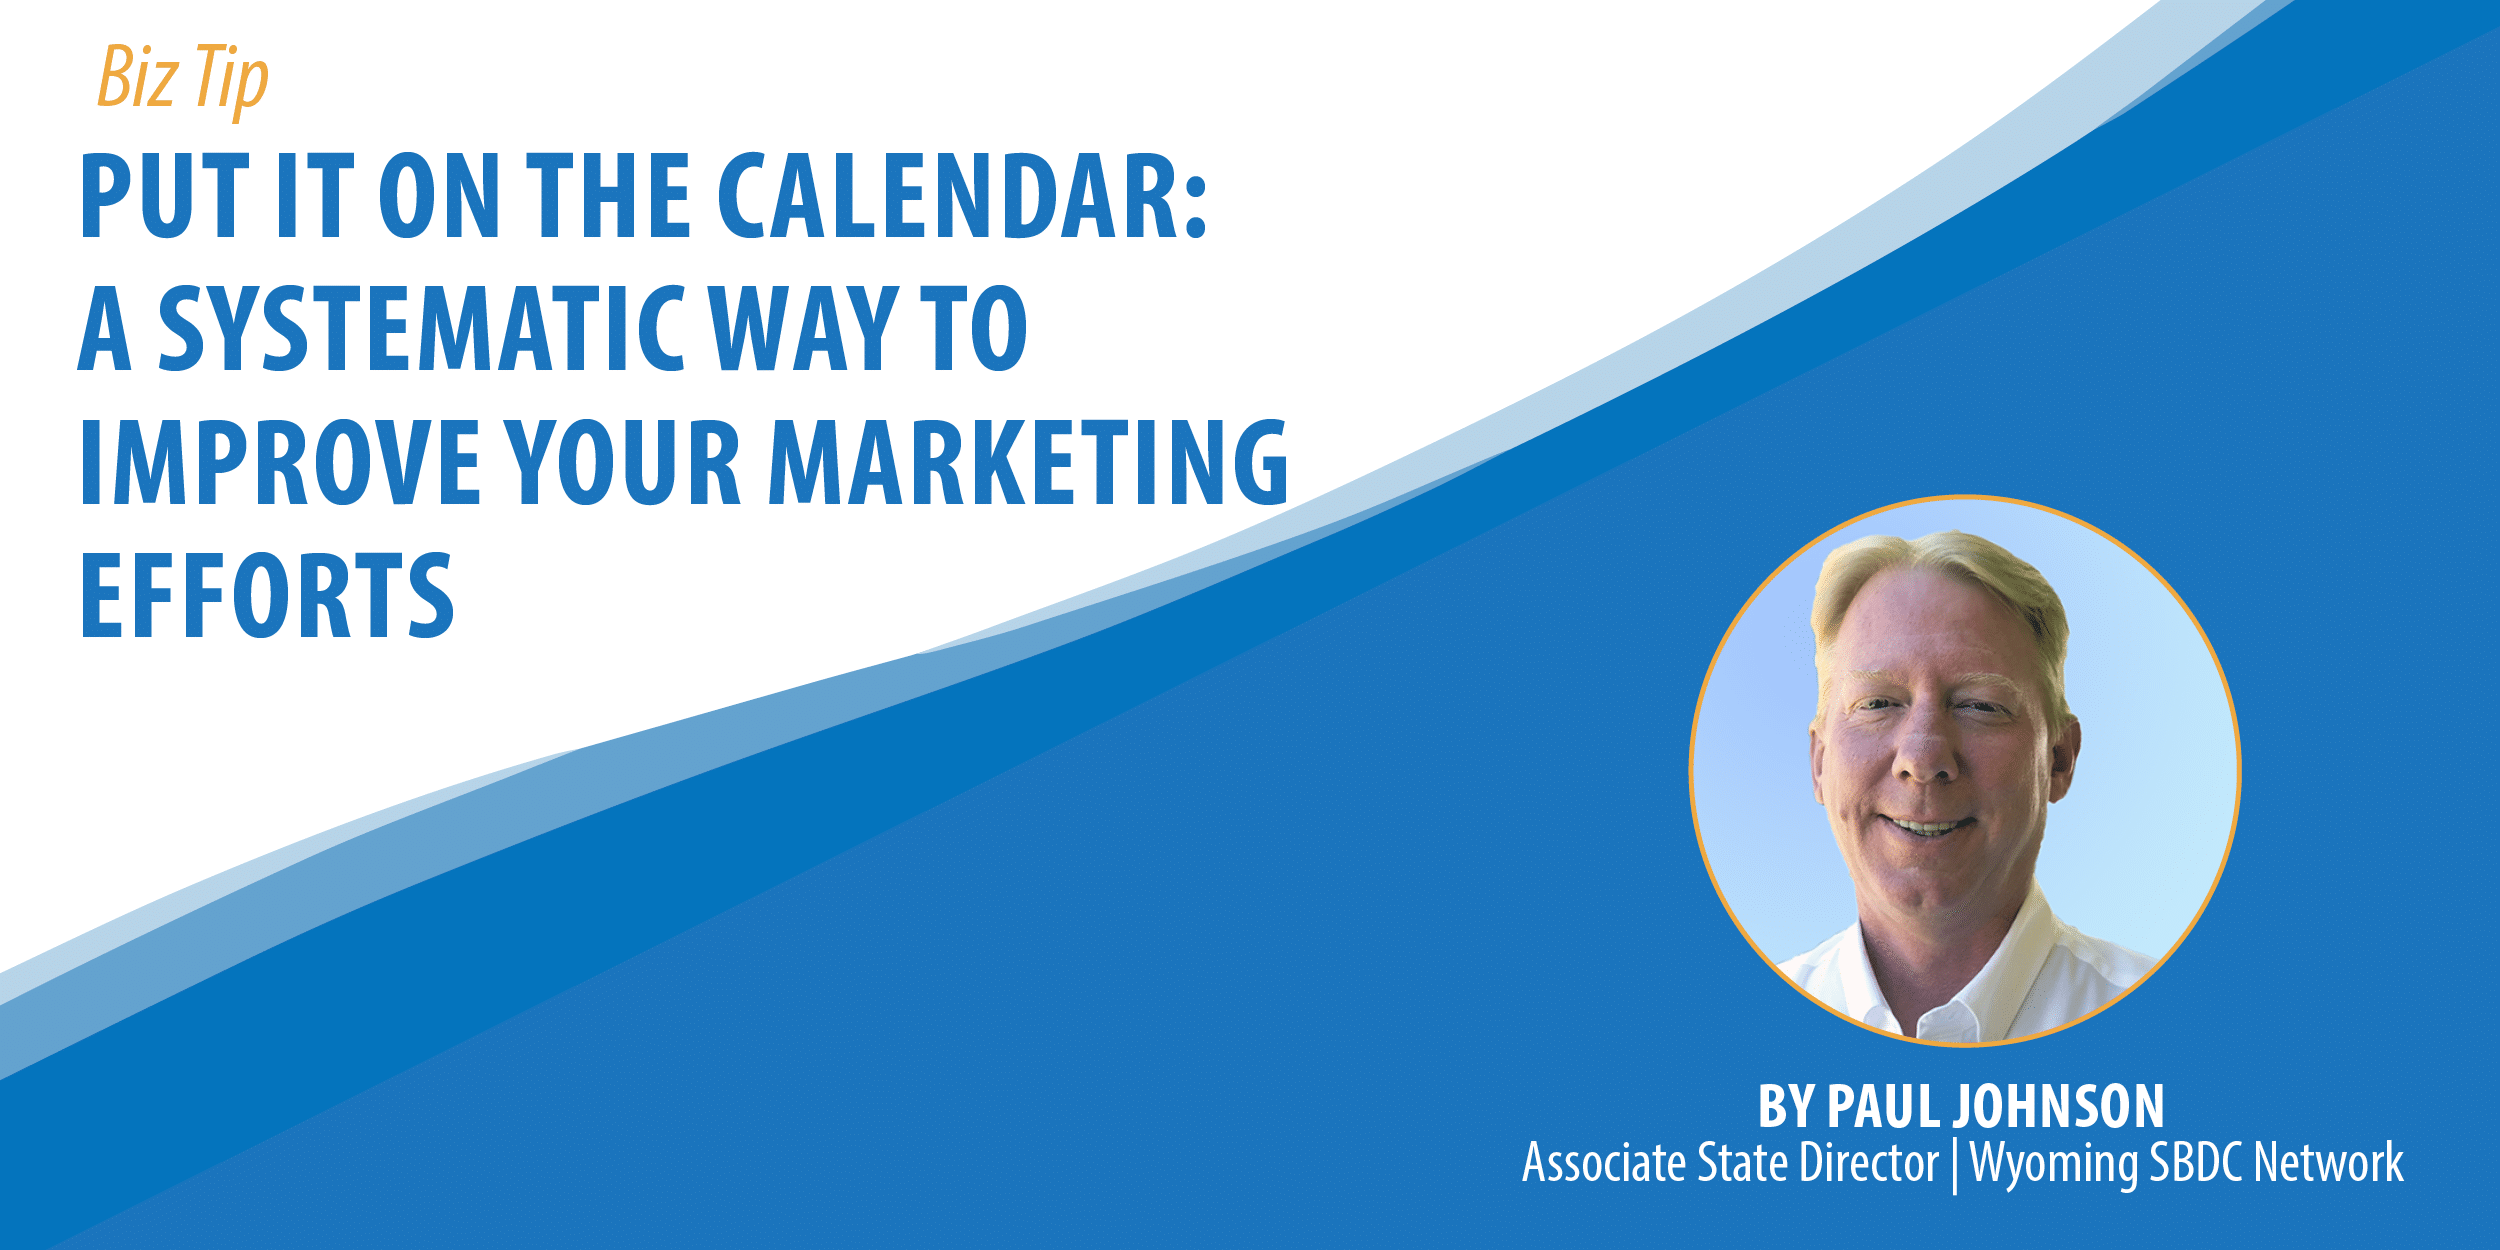 Put it on the Calendar: A Systematic Way to Improve your Marketing Efforts